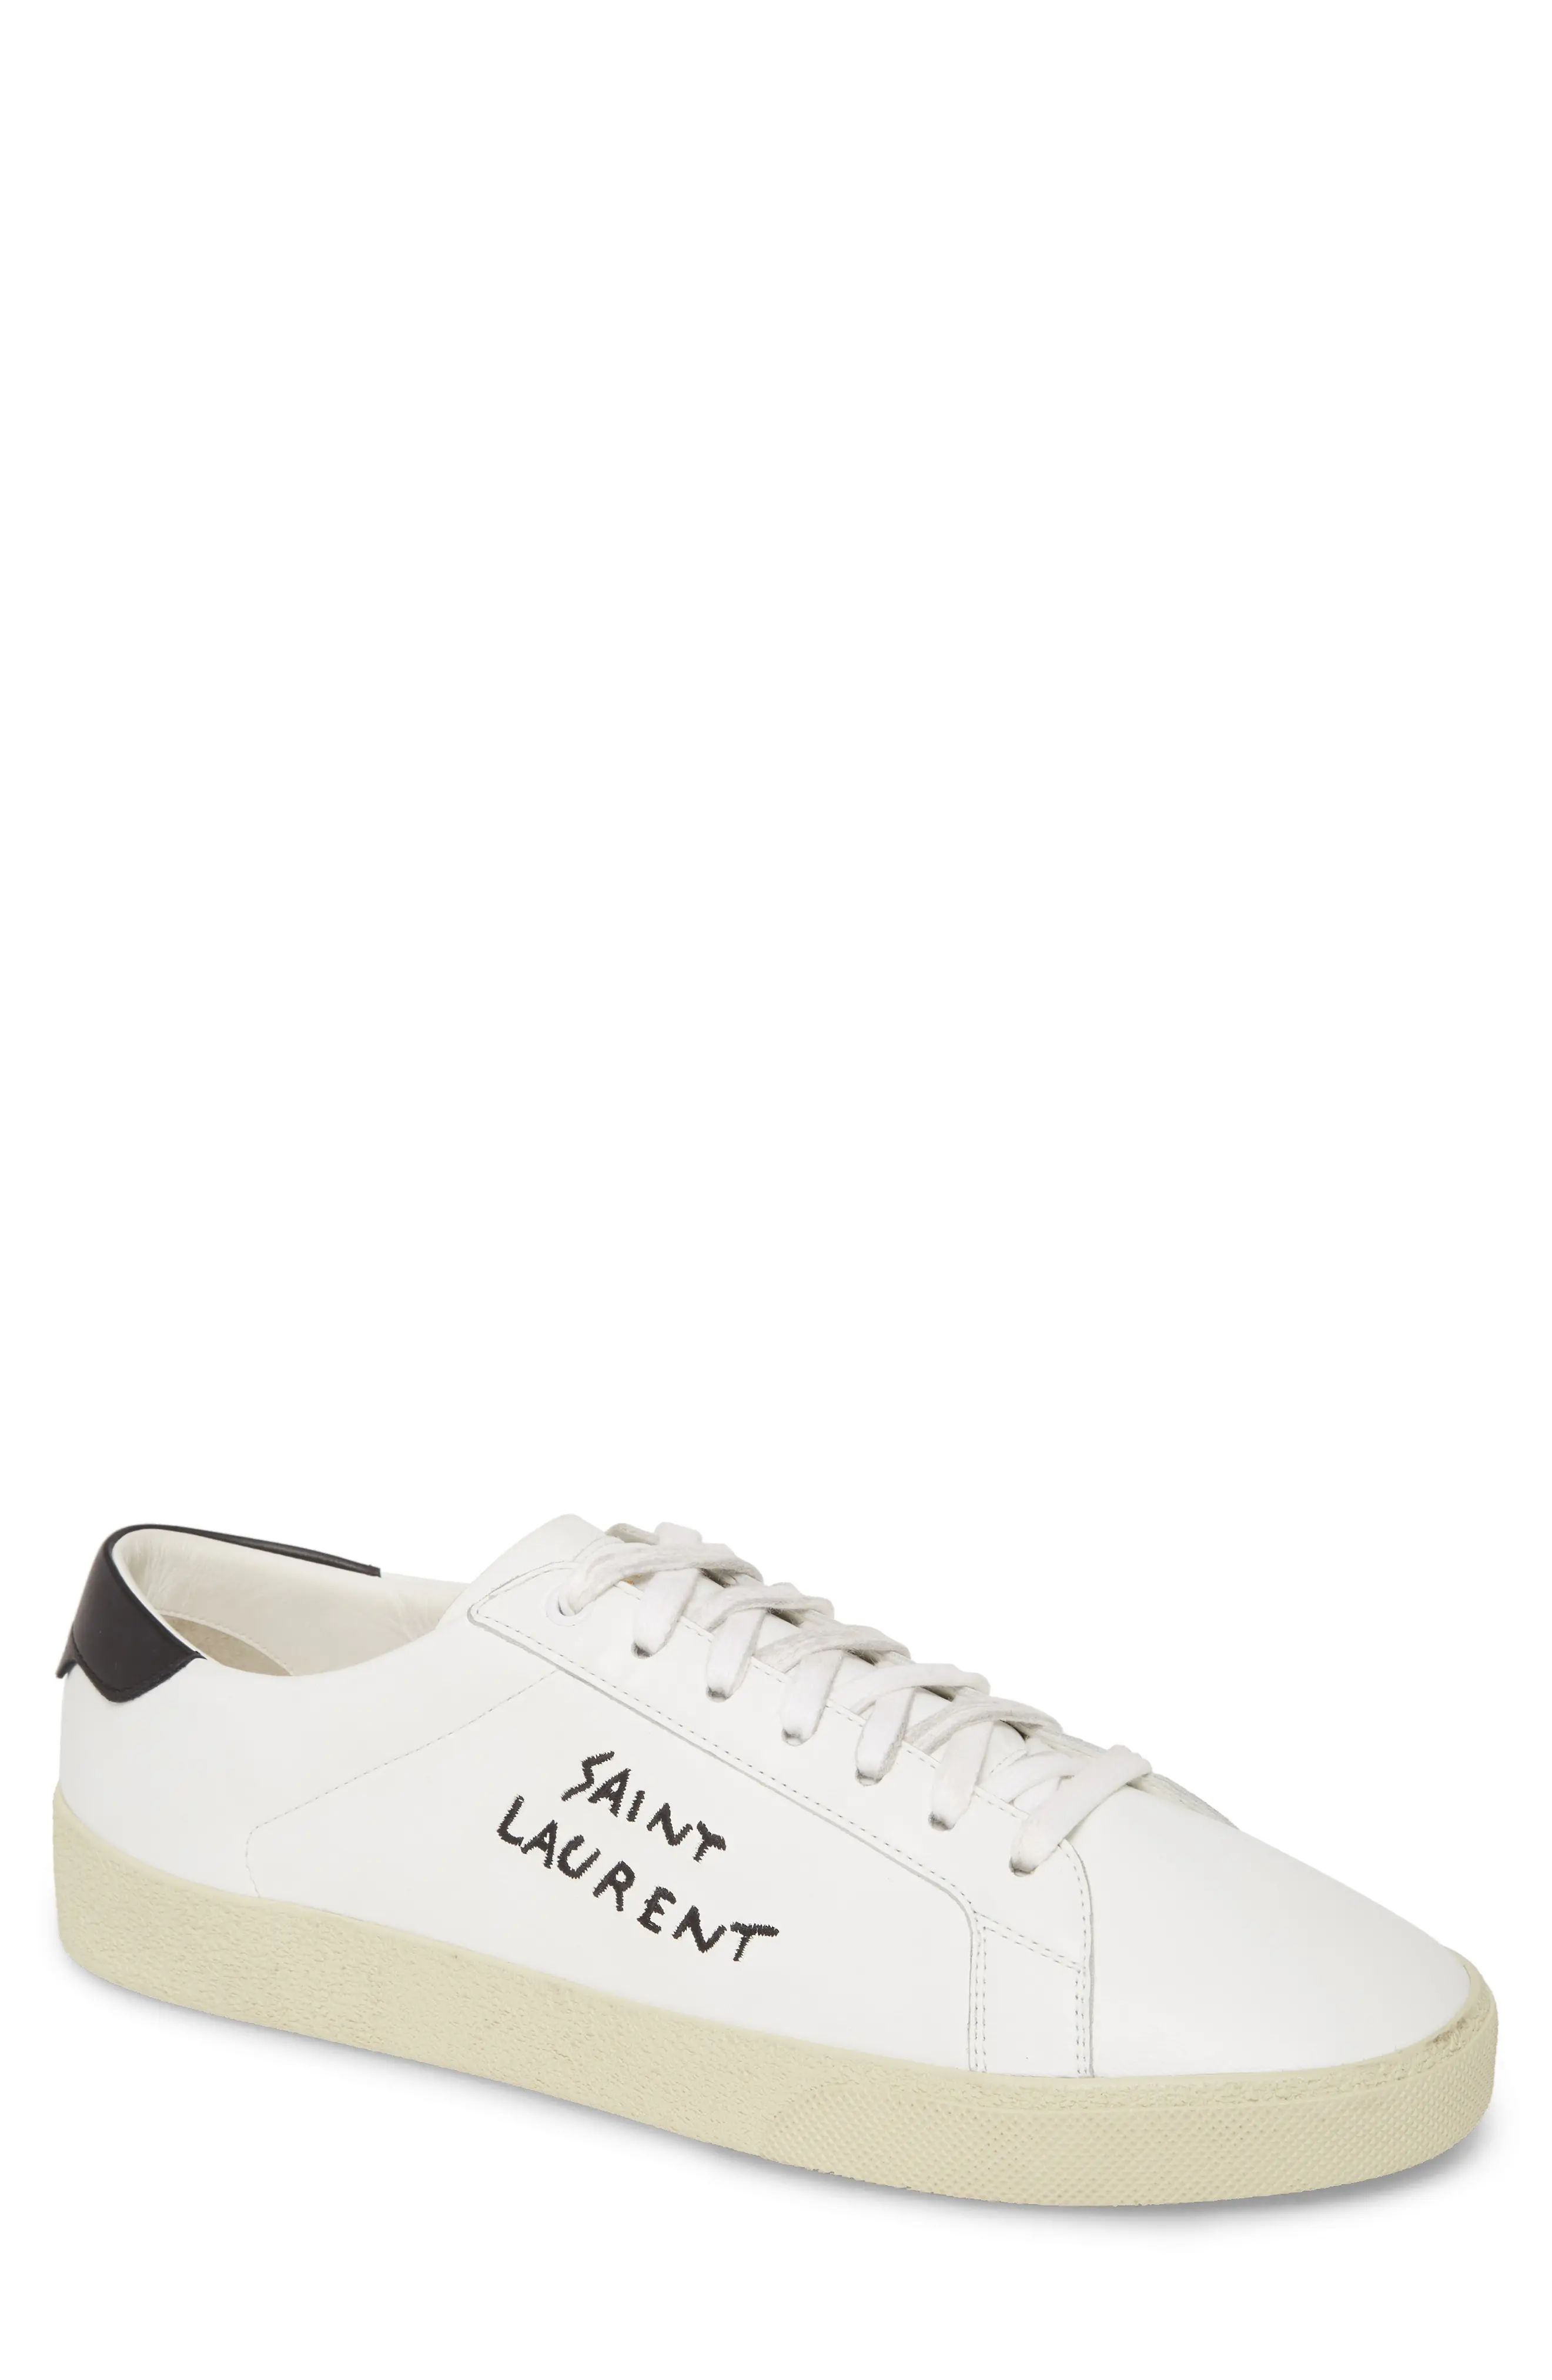 Saint Laurent Low Top Sneaker, Size 11Us in Optic White /Nero at Nordstrom | Nordstrom